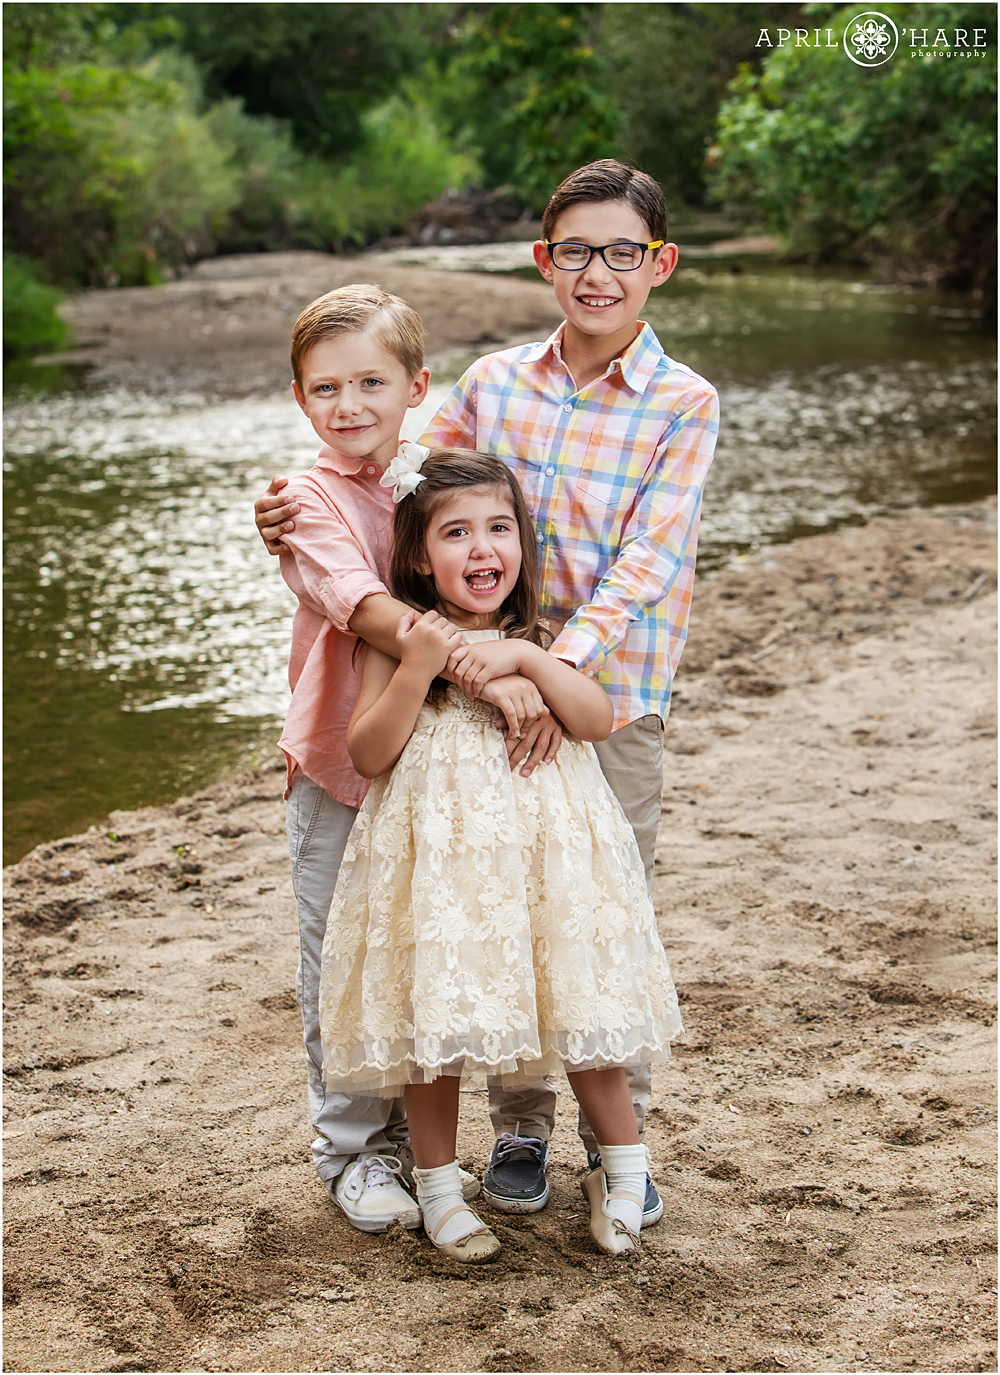 Sibling photos next to Cherry Creek at Four Mile Historic Park in East Denver